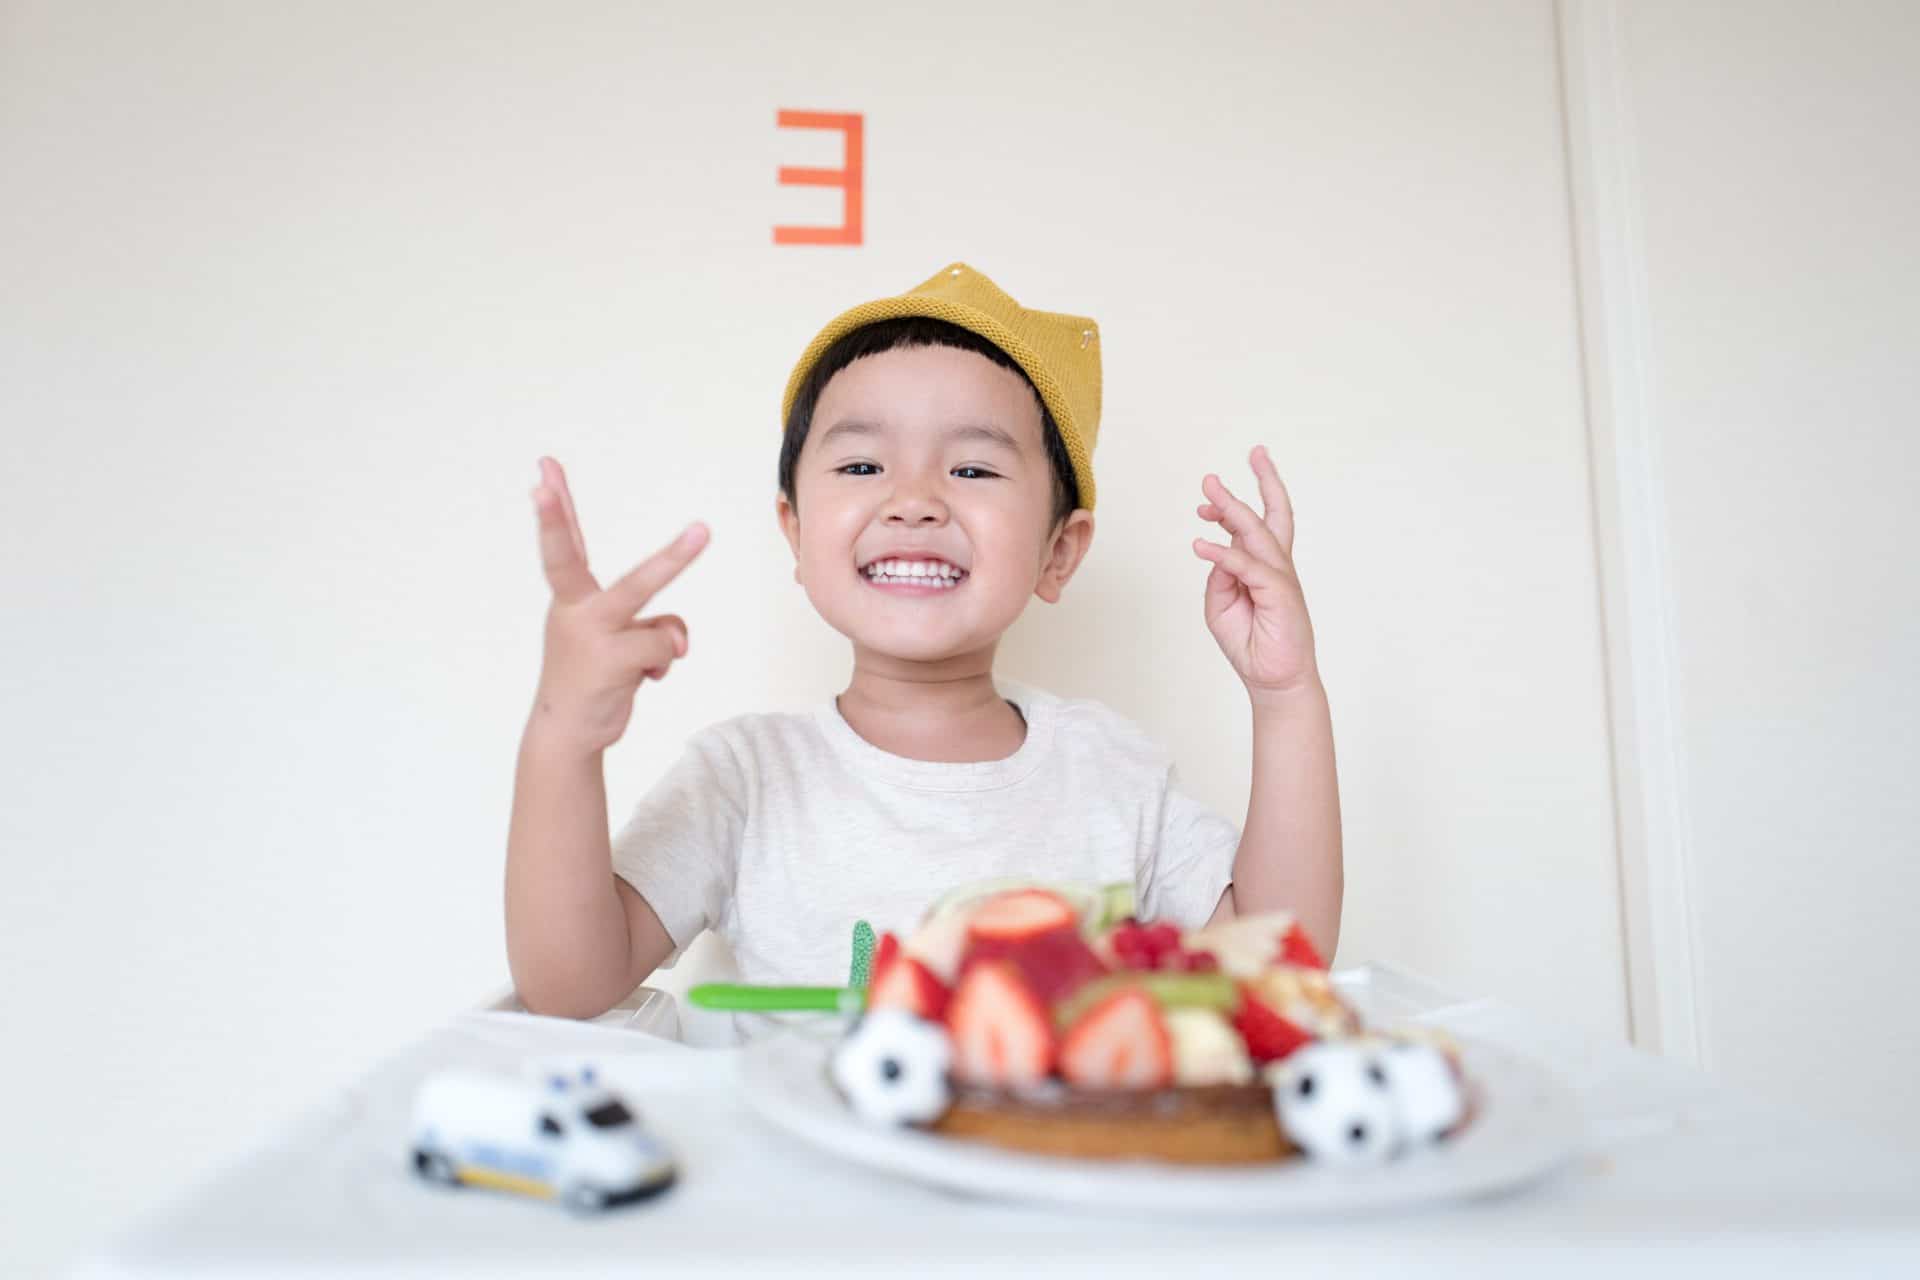 Stephen-Chang-believes-receiving-first-phase-treatment-as-early-as-possible-will-give-children-more-choices-in-the-future-source-Unsplash